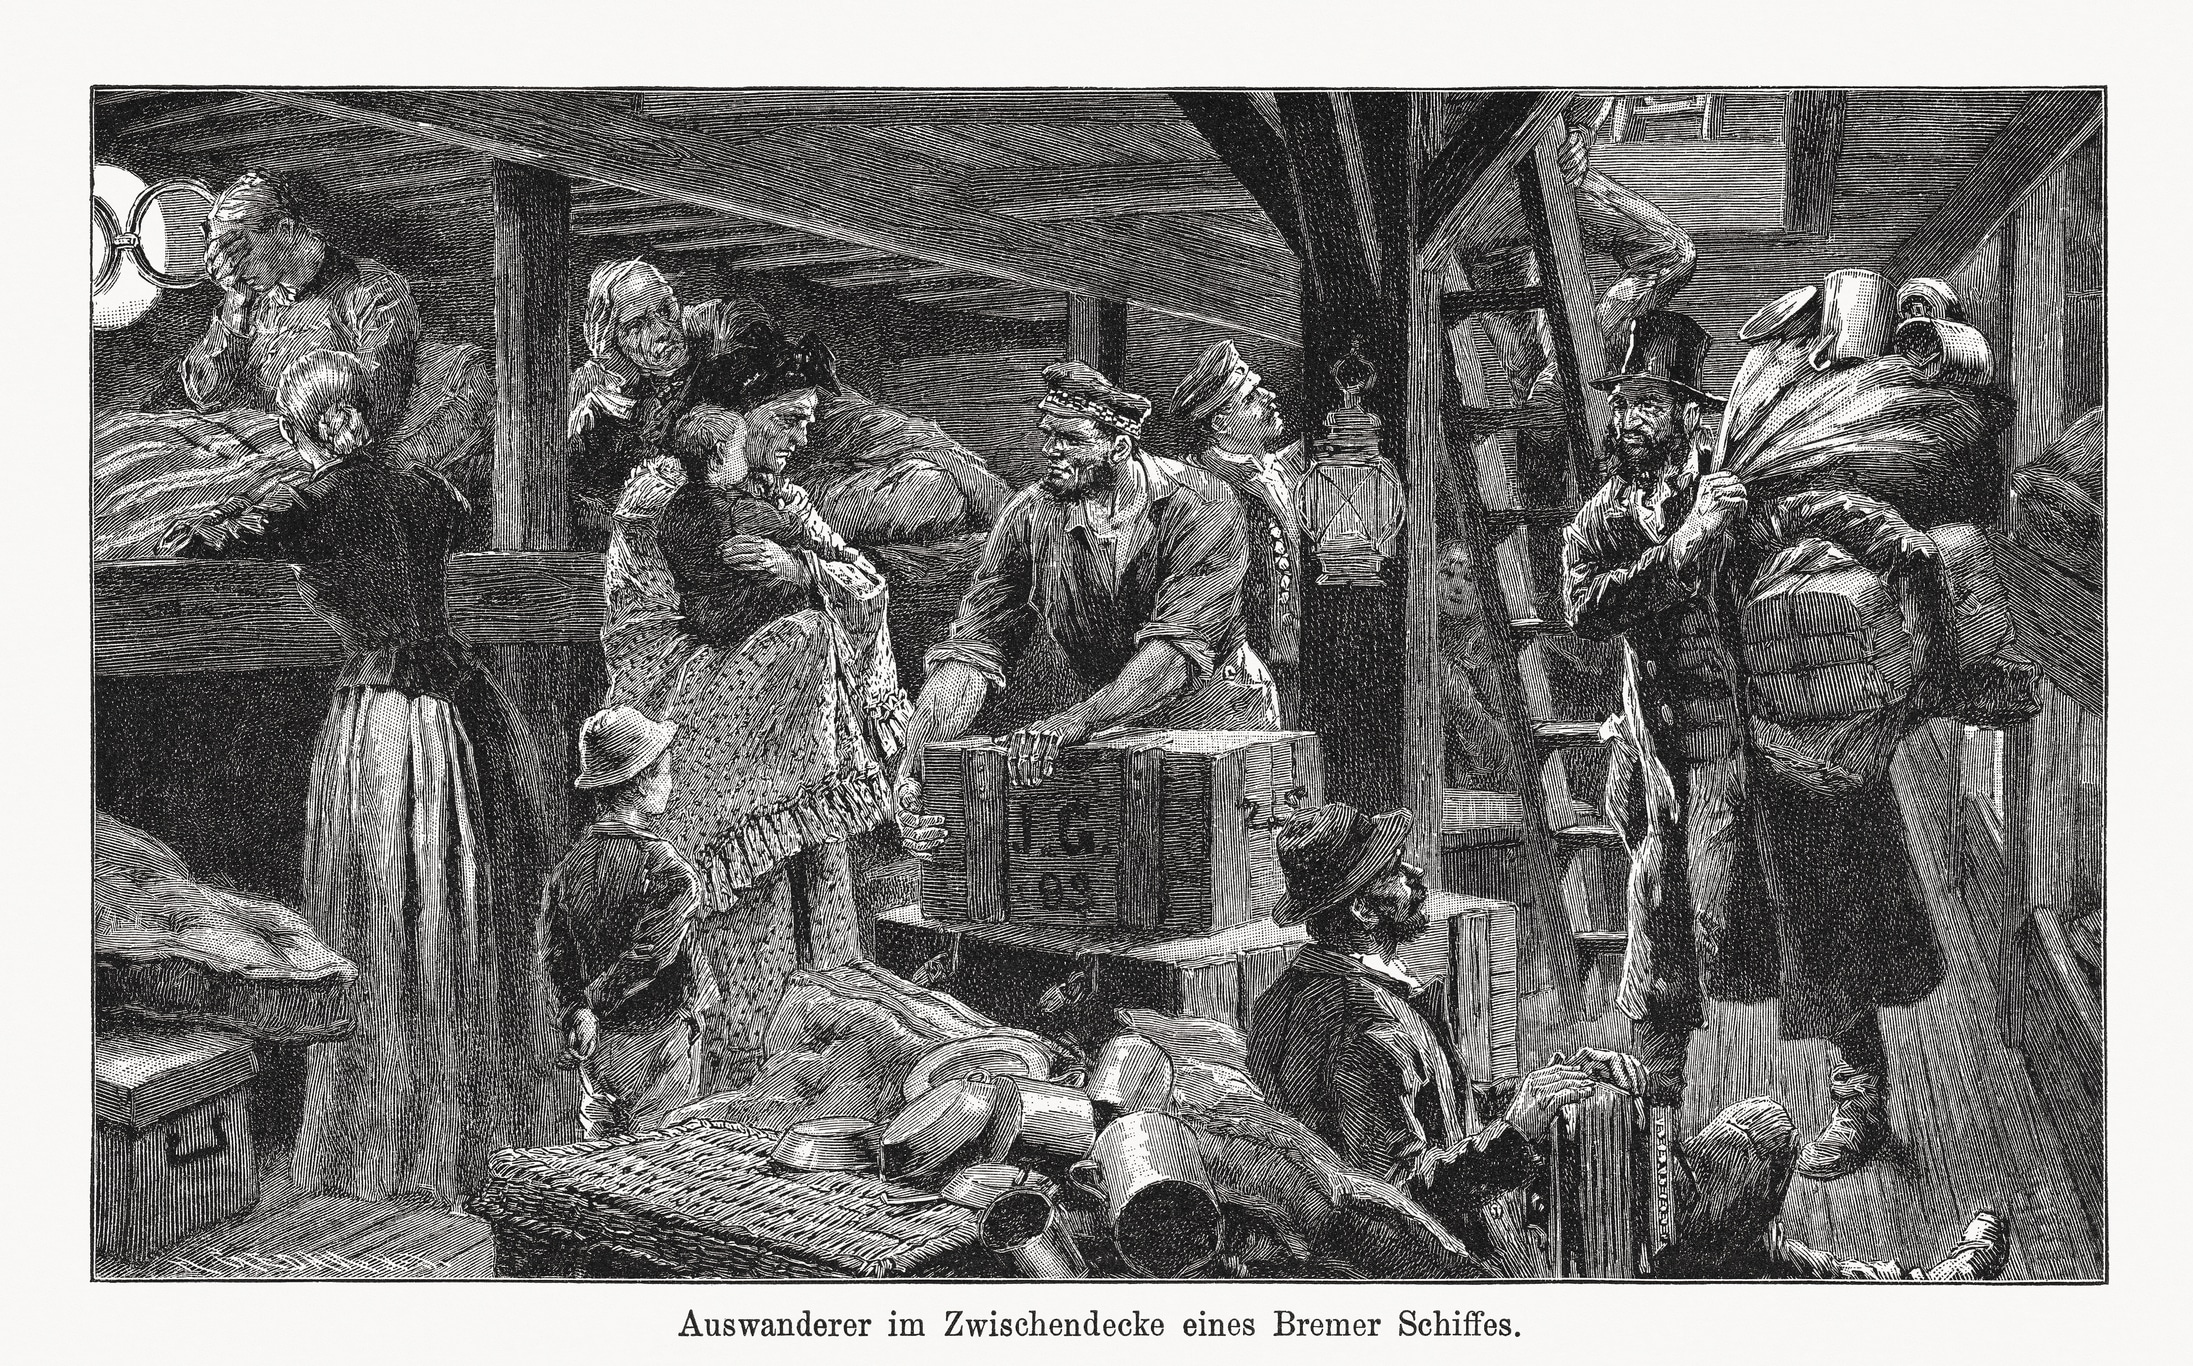 Immigrants in the steerage of a German ship on the crossing to America at the end of the 19th century